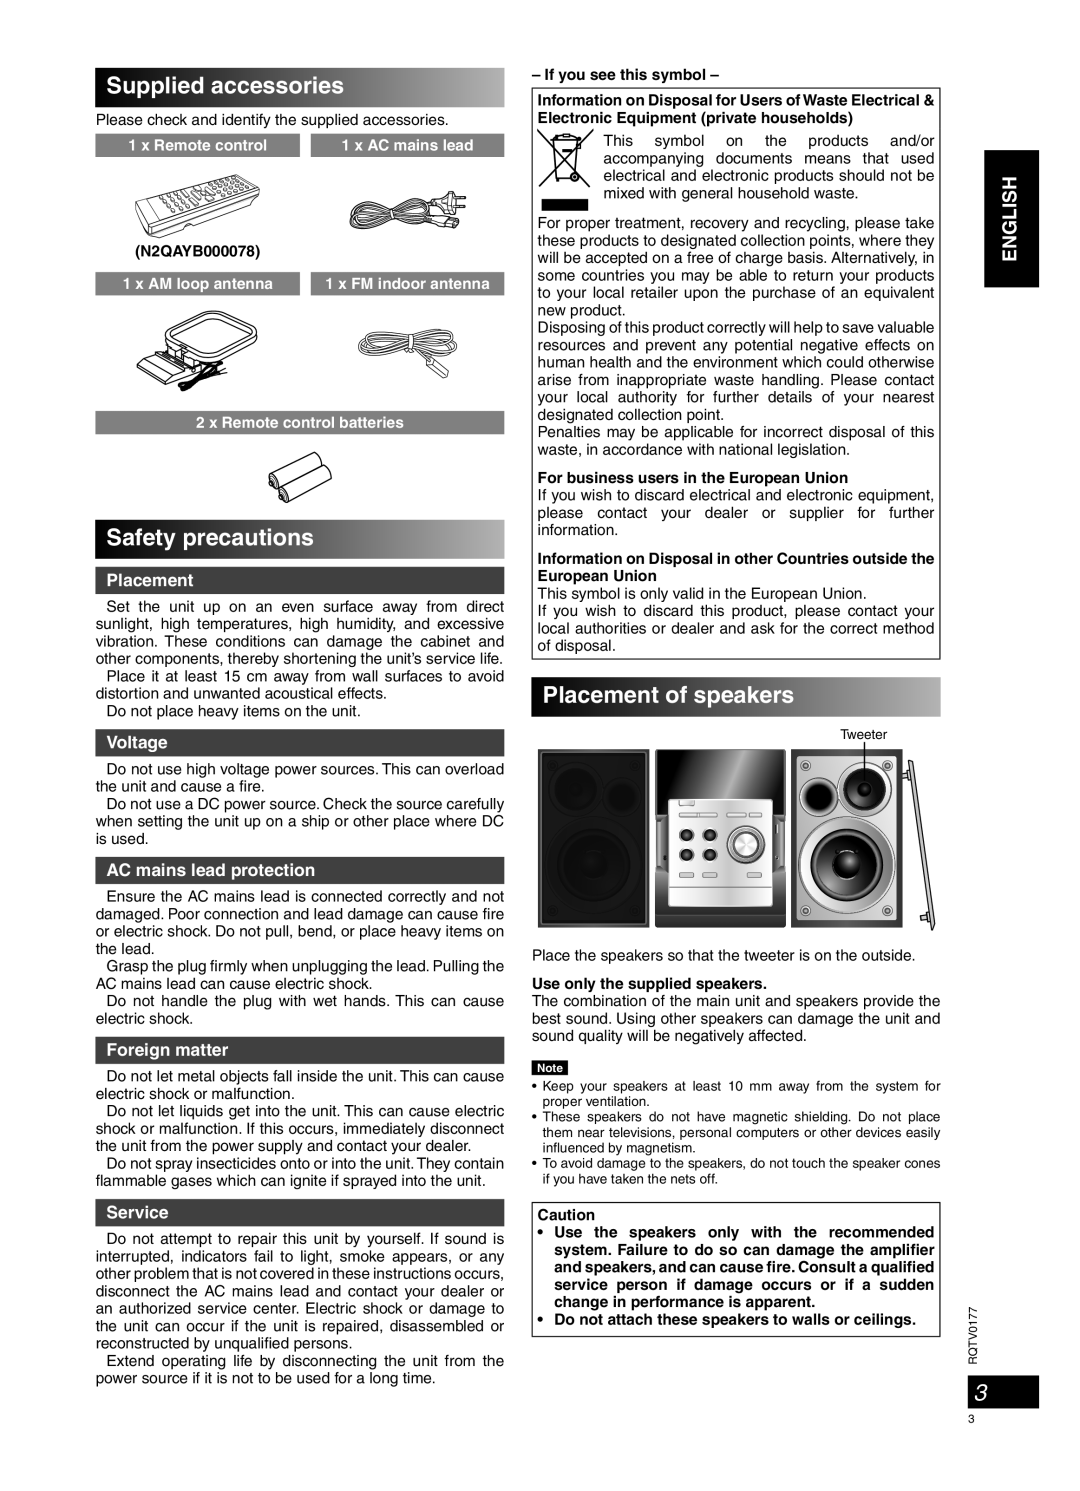 Panasonic SC-PM45 manual Supplied accessories, Safety precautions, Placement of speakers, English, Voltage, Foreign matter 